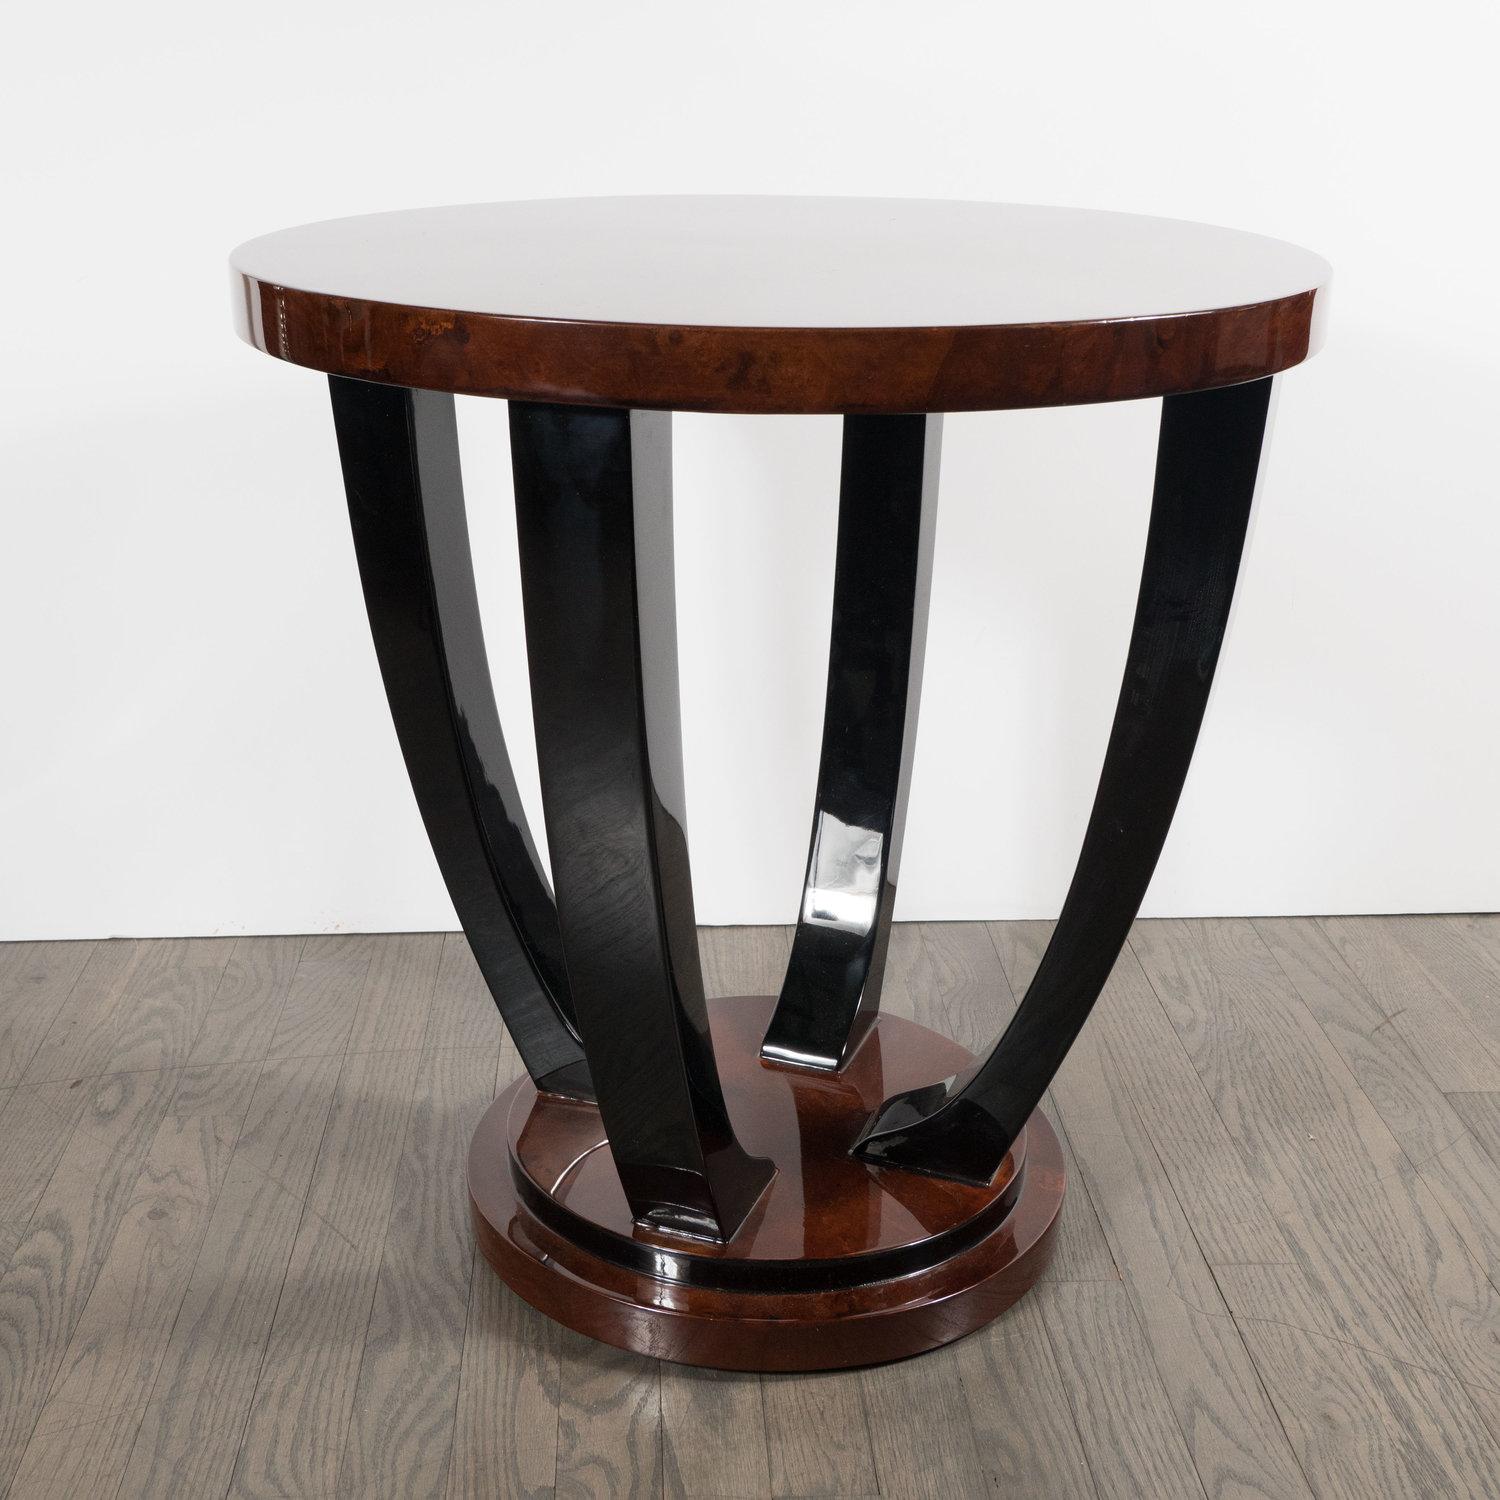 This stunning Art Deco Gueridon Table was realized in France, circa 1935. It features two round book-matched walnut tops connected by curving black lacquer supports. Scroll form feet, executed in black lacquer, peak out from beneath the lower